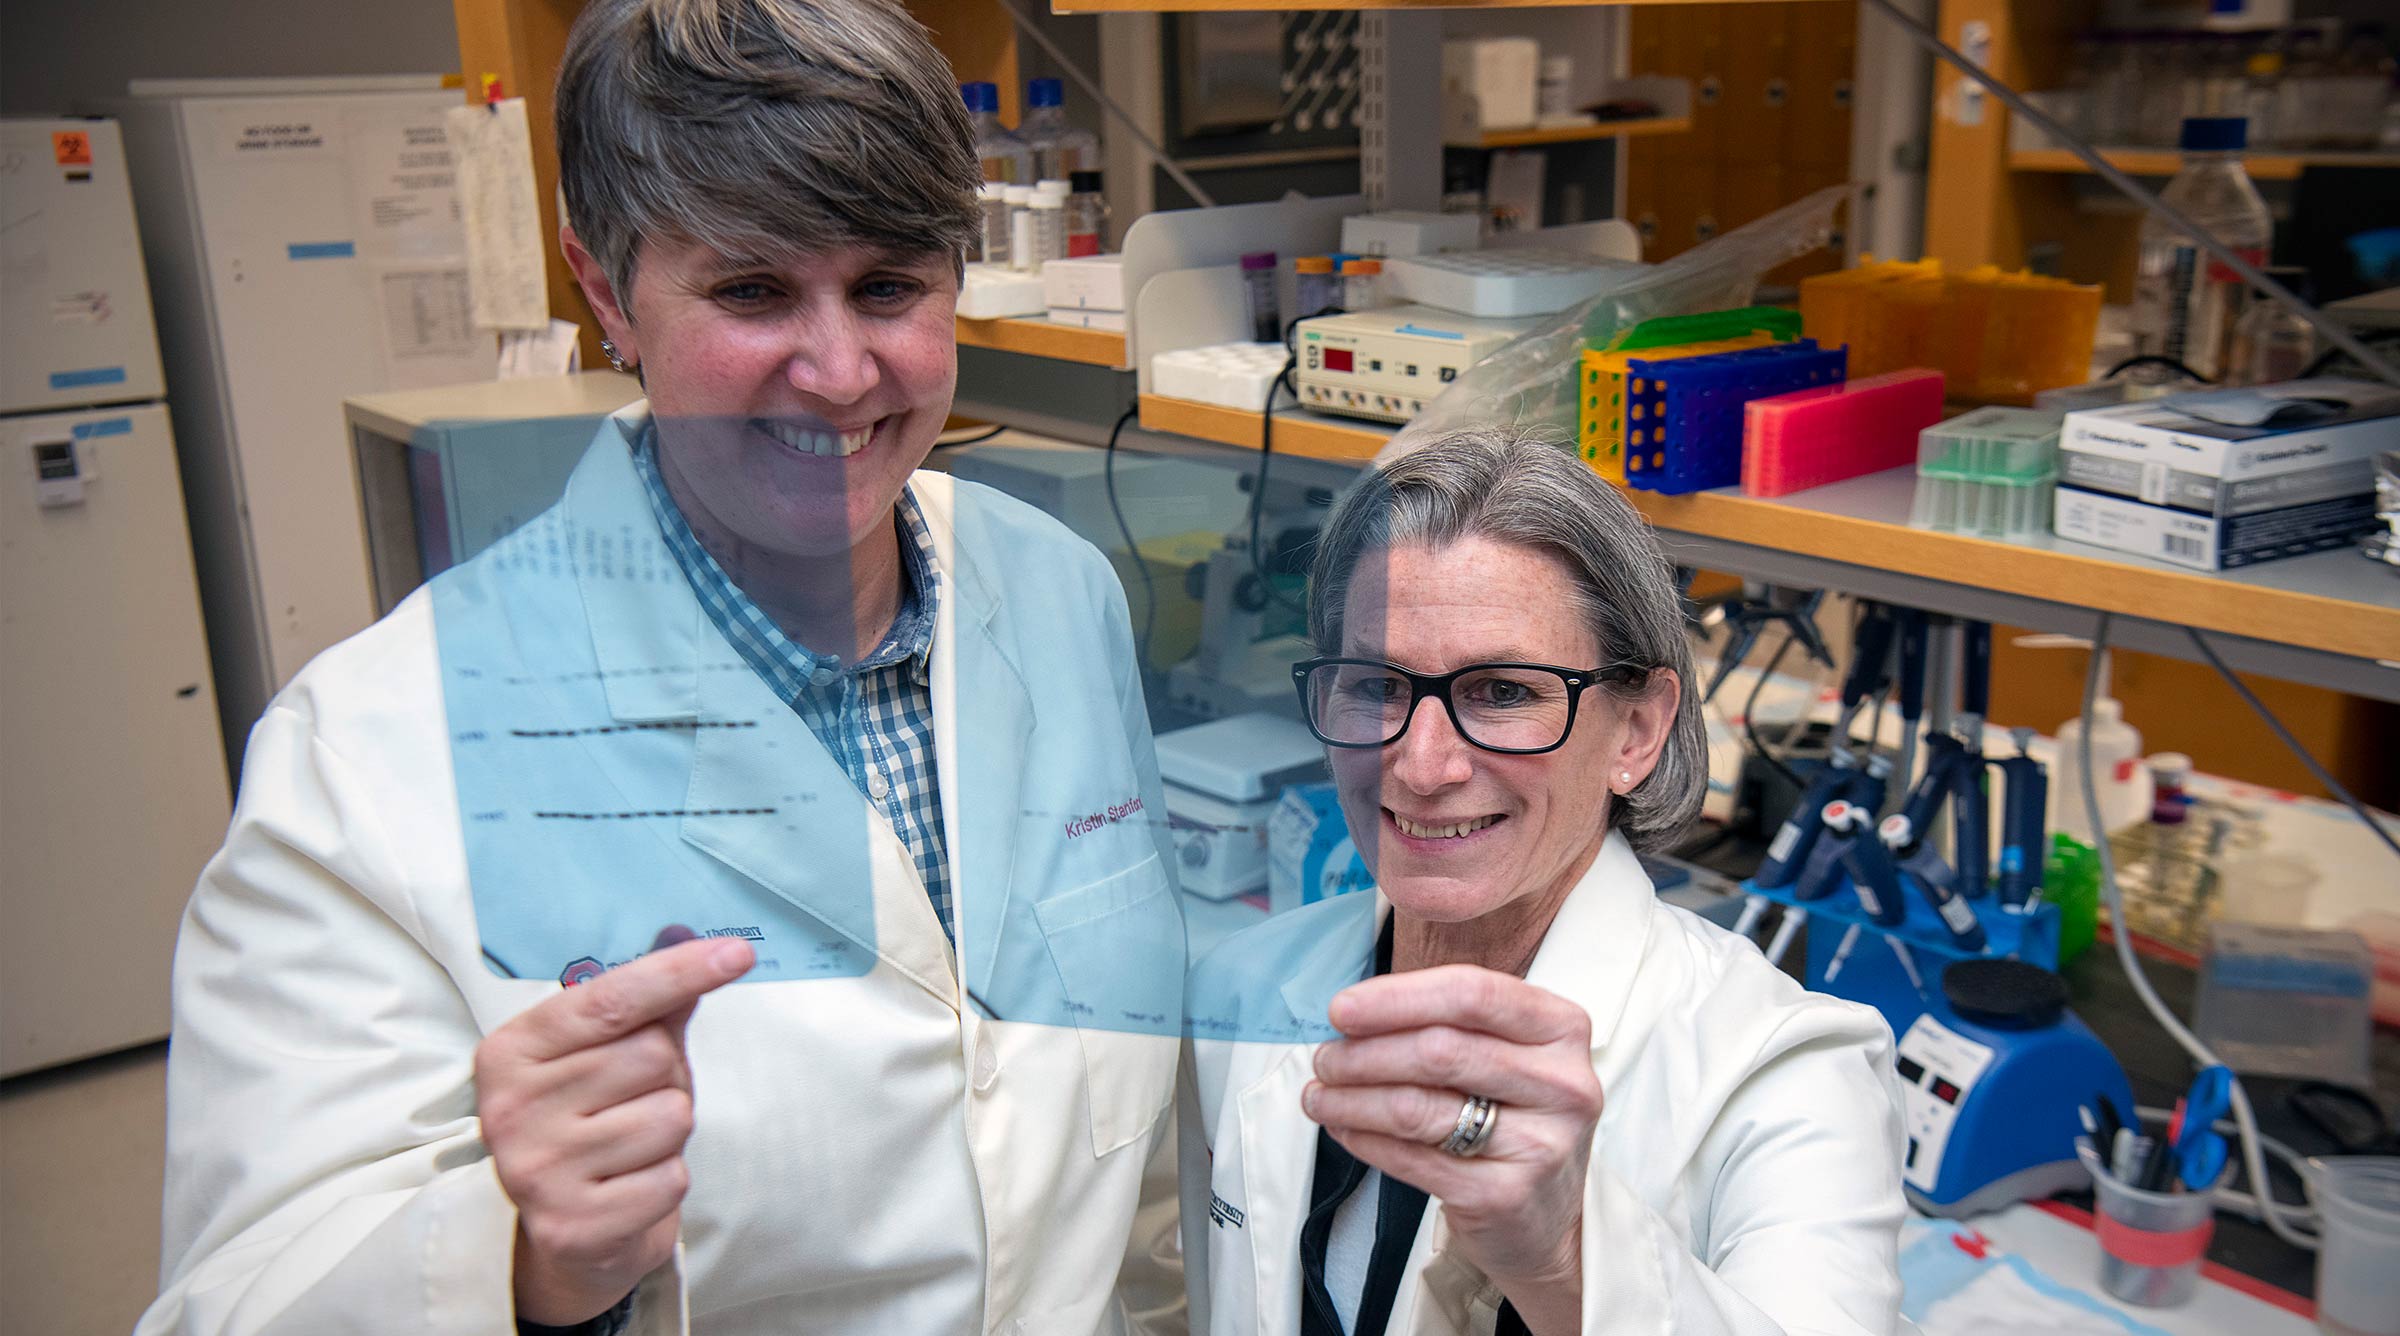 Lisa Baer and Kristin Stanford working together in the lab